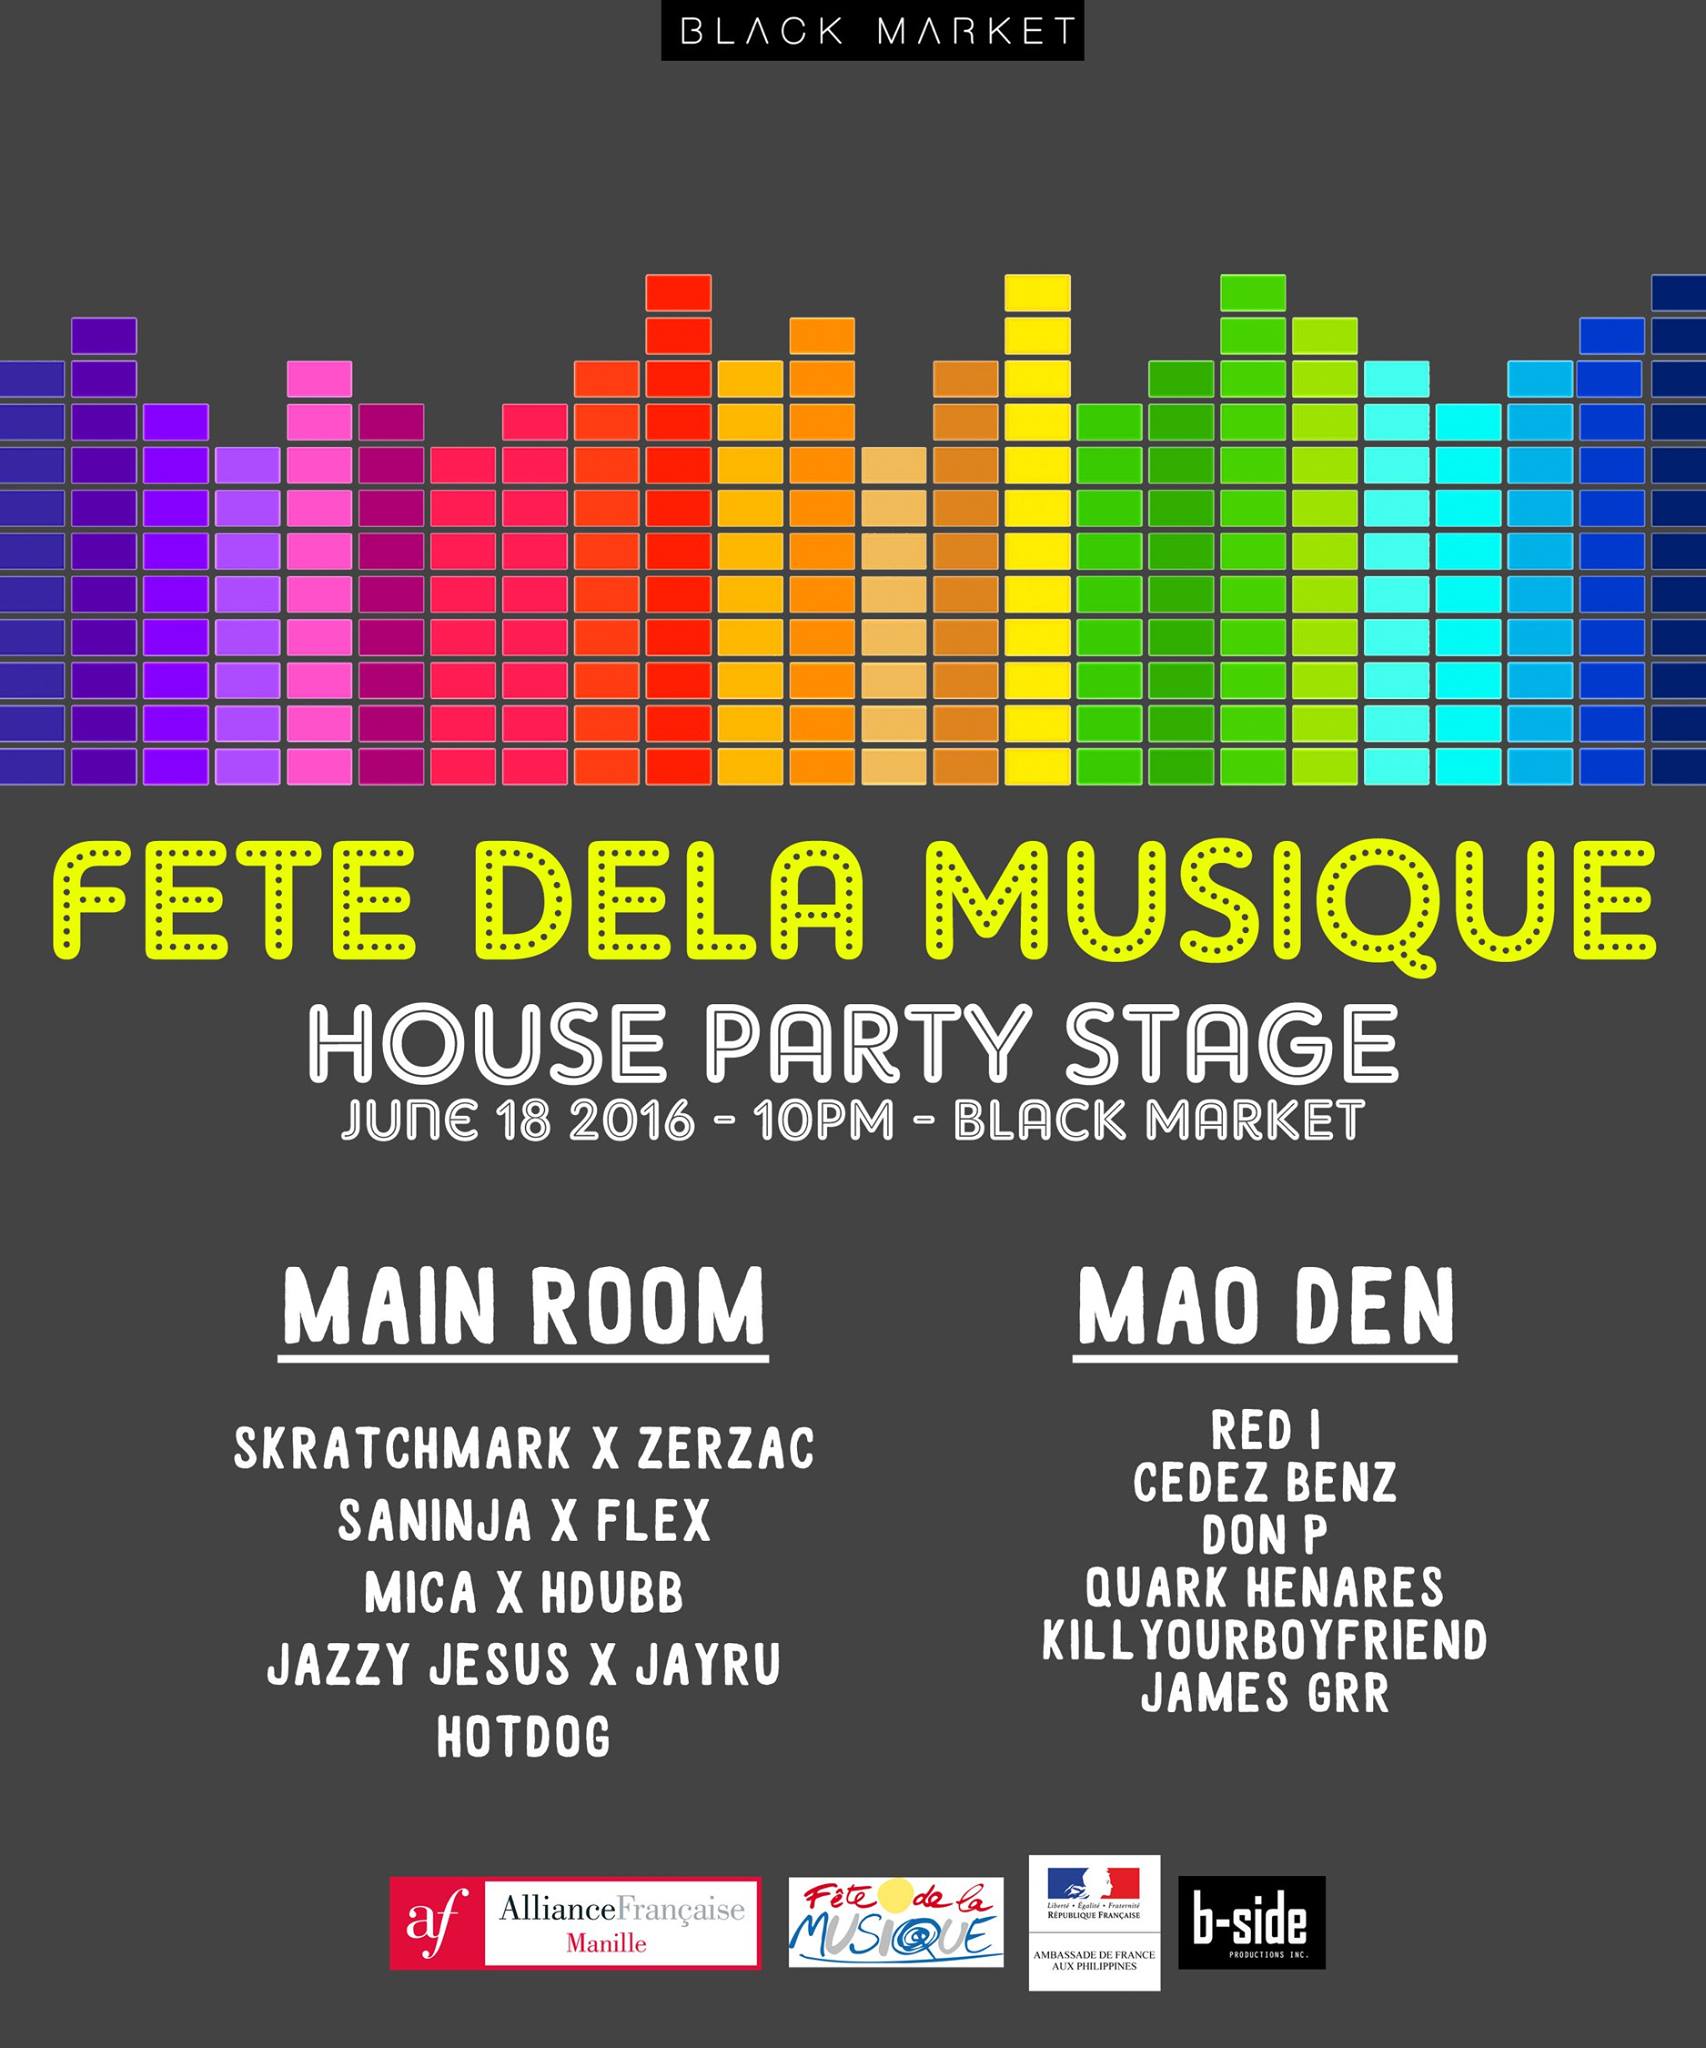 Fete Dela Musique: House Party Stage Hosted by Black Market clock Tomorrow at 10 PM - 5 AM Jun 18 at 10 PM to Jun 19 at 5 AM pin Show Map Black Market WAREHOUSE 5, LA FUERZA COMPOUND 2, SABIO ST., Makati, Philippines About Discussion Write Post Add Photo / Video Create Poll Write something... Details In celebration of Fete Dela Musique, we bring you the House Party Stage! Main Room: Mica b2b HDubb Hotdog (Xtina Superstar, Karlo V, Asela) Skratchmark b2b Zerzac Flex b2b Saninja (The Zombettes) Jazzy Jesus b2b JayRu Mao Den: Cedez Benz Quark Henares Red-i Don P Kill Your Boyfriend b2b James Grr